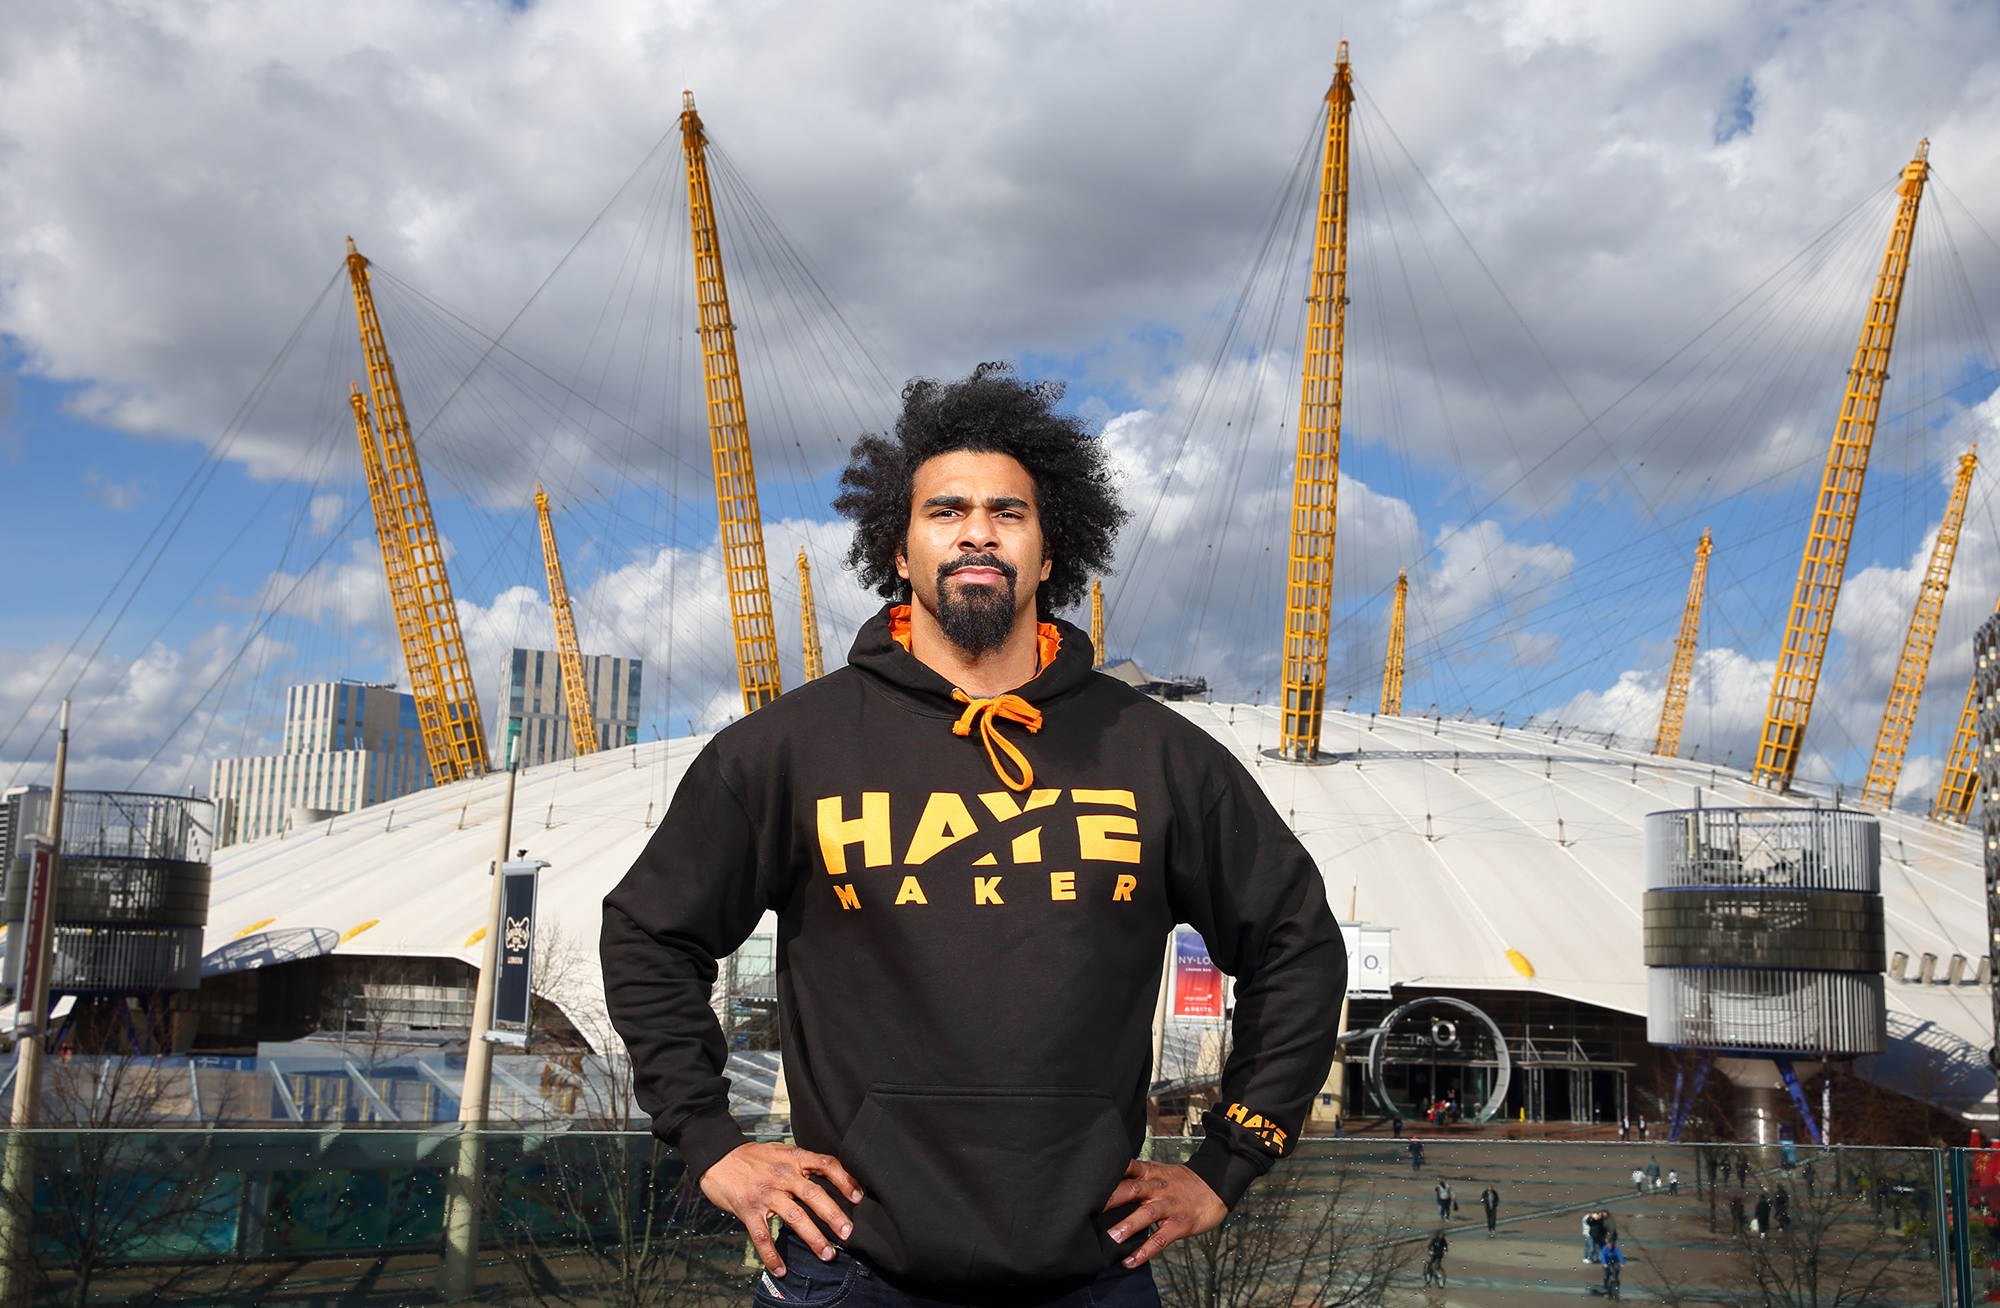 LONDON, ENGLAND - MARCH 29: David Haye attends photocall for the announcement that the former two-weight world champion David Haye will face the undefeated Arnold 'The Cobra' Gjergjaj on Saturday May 21 at The O2 in London (Photo by Mike Marsland/Mike Marsland/WireImage)